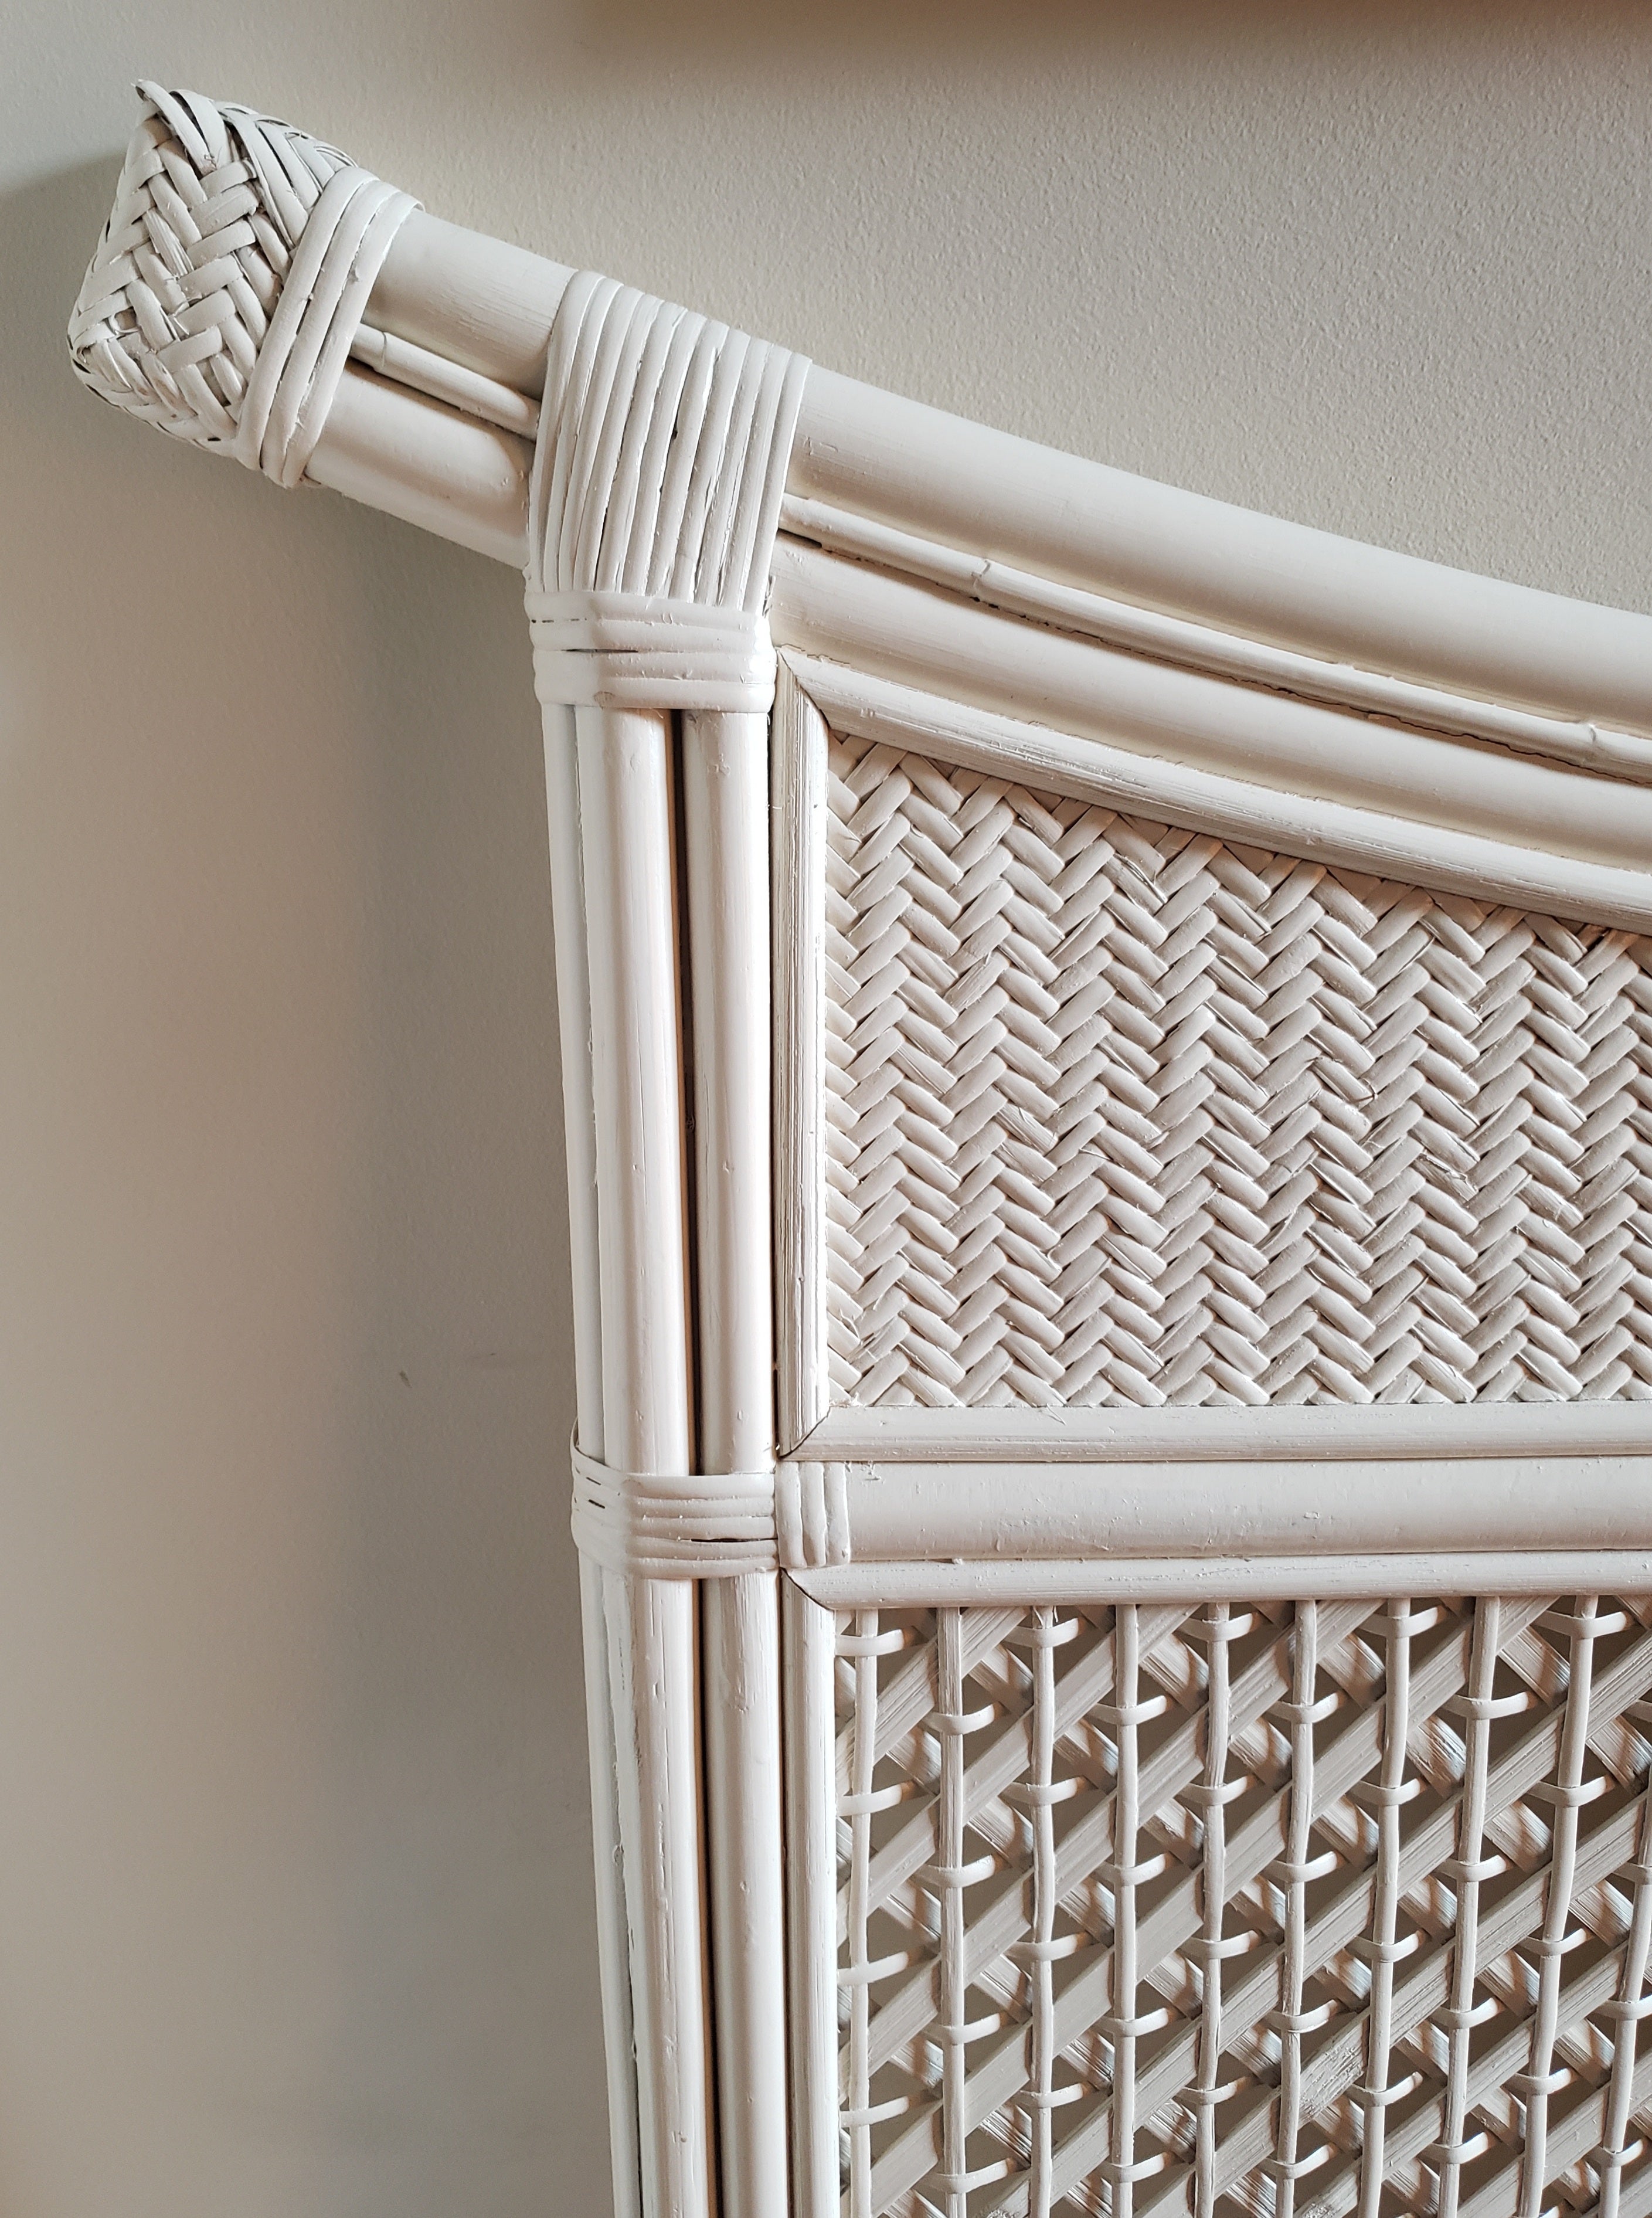 Boho Chic Vintage wicker Rattan twin headboards. 
Painted in antique white creamy color. 
Measure 48.5 in width to the extremities of the headboards, 41.5 in width to the bed frame and 54